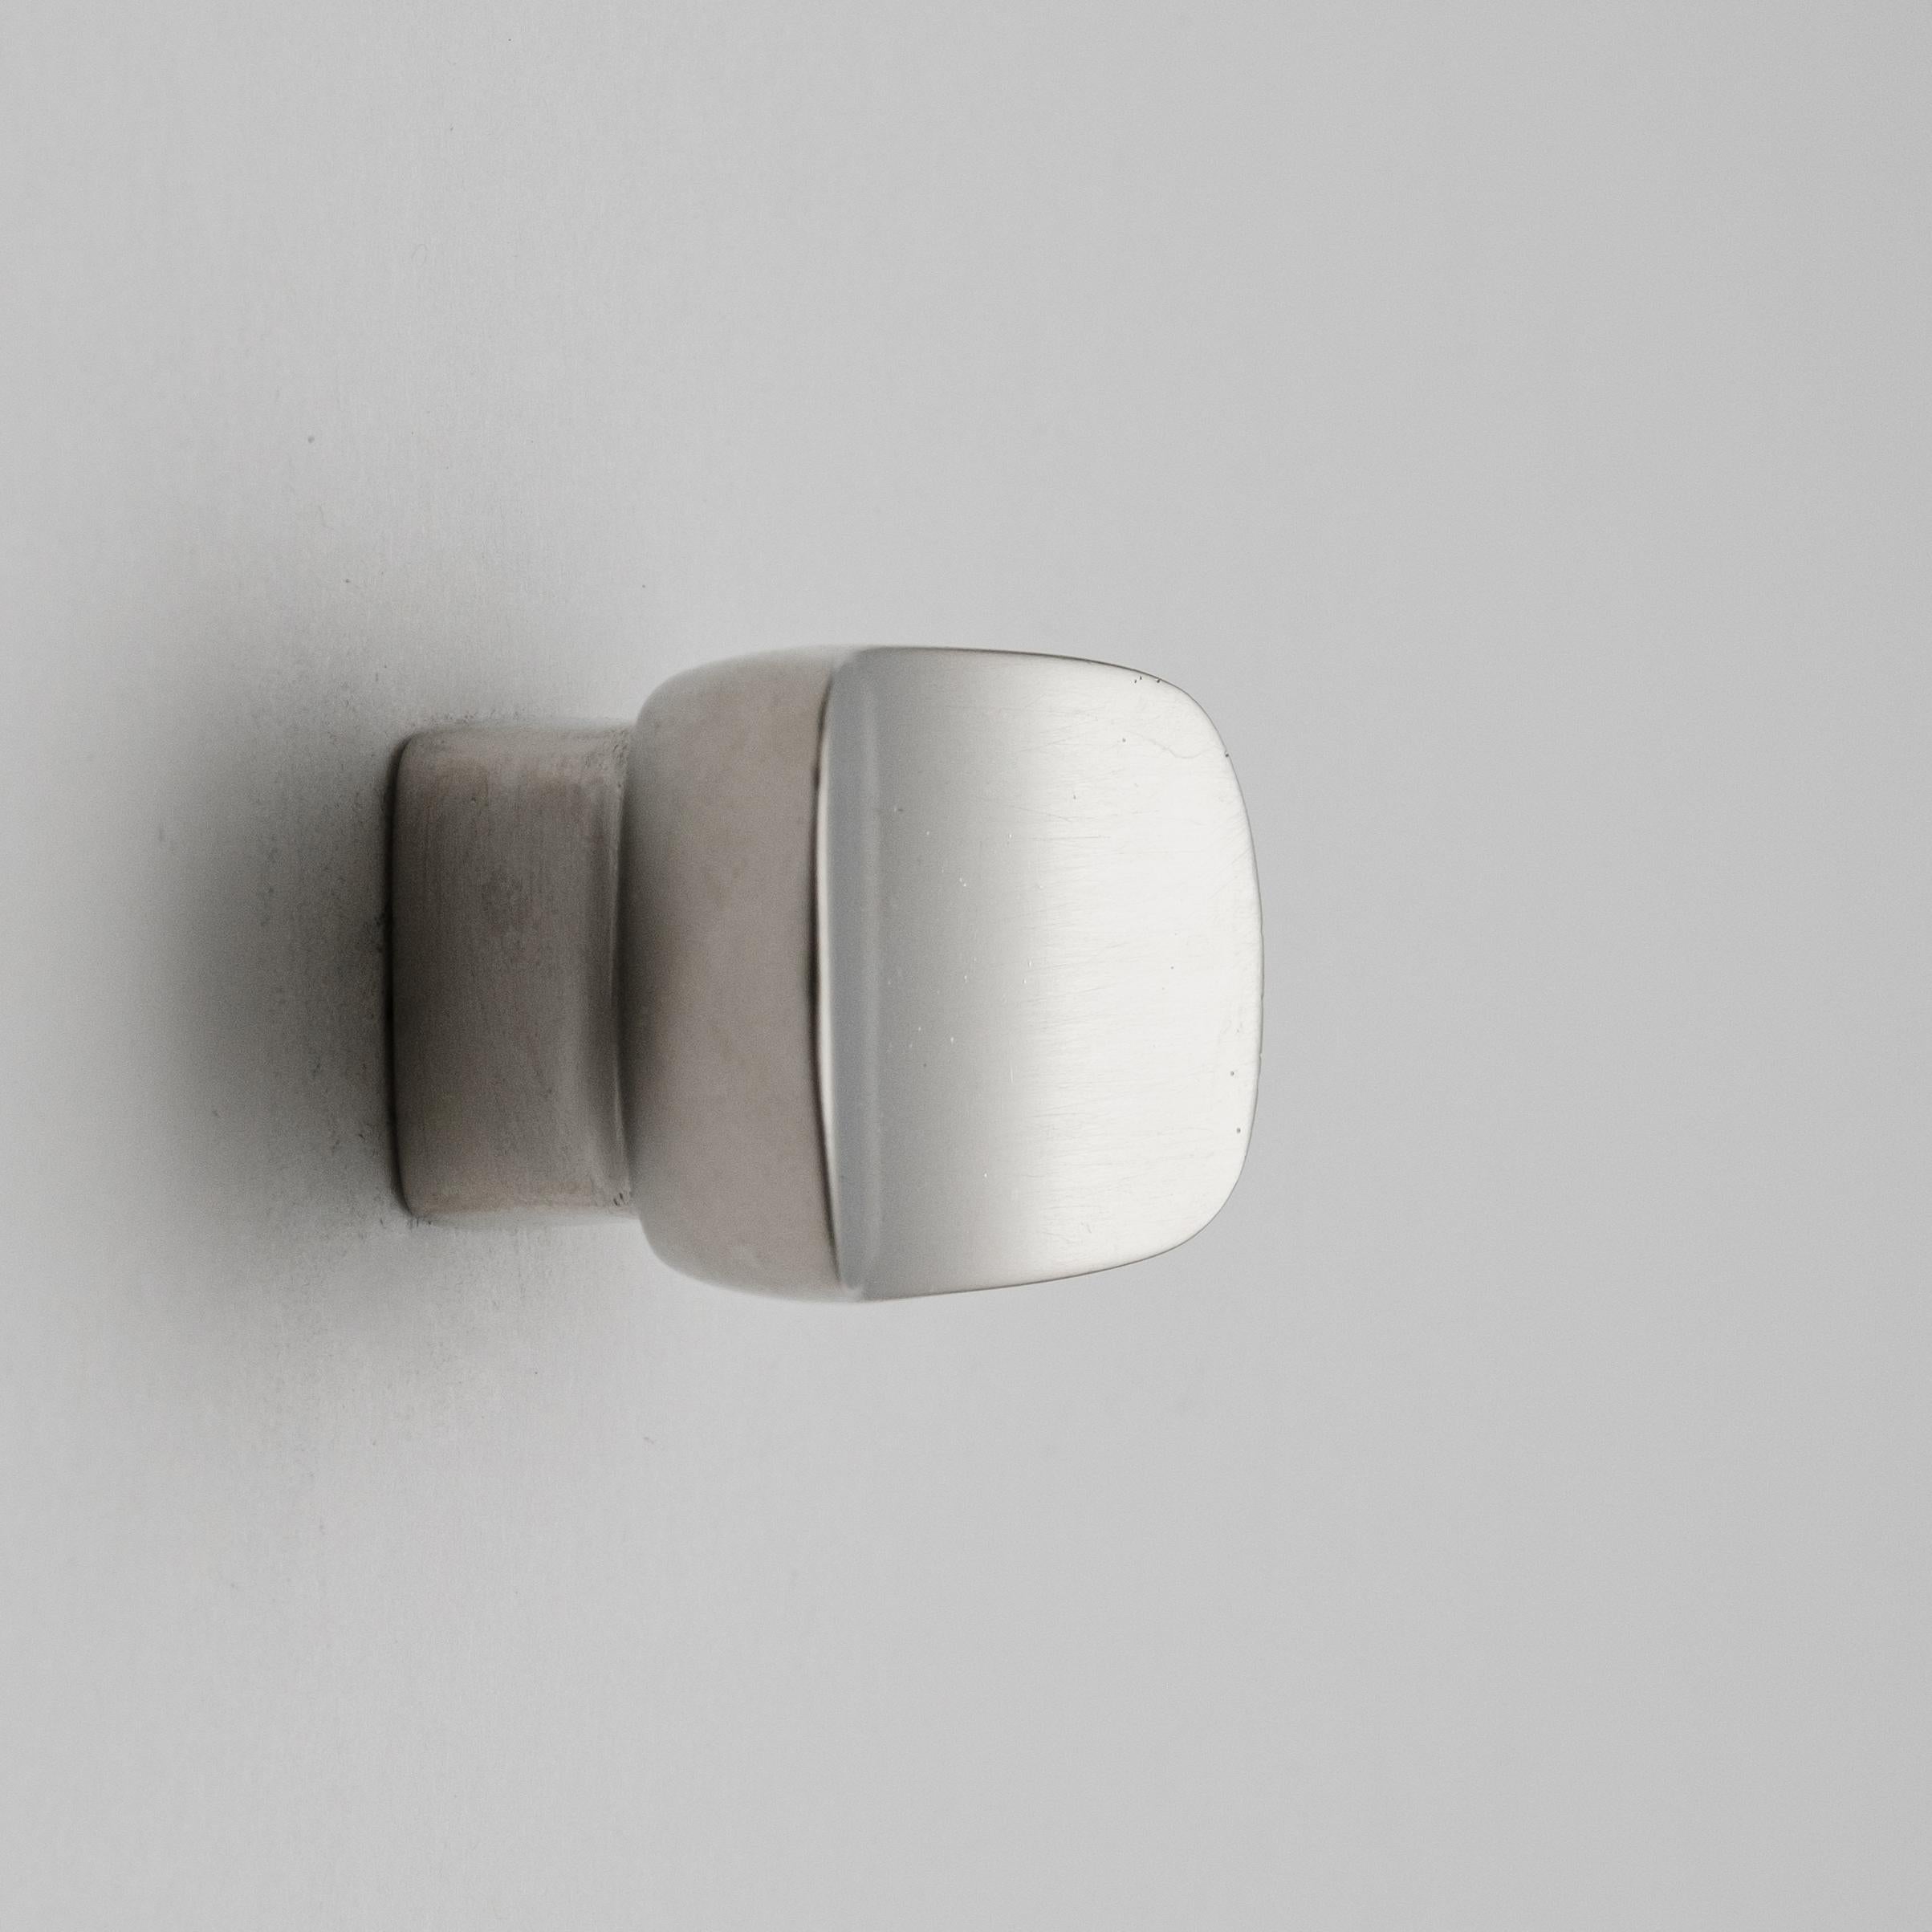 Carl Auböck Model #9038 knob in nickel.

Designed in the 1950s, this versatile and Minimalist Viennese knob is executed in softly brushed nickel by Werkstätte Carl Auböck, Austria. Its minimalist design combines clean form with